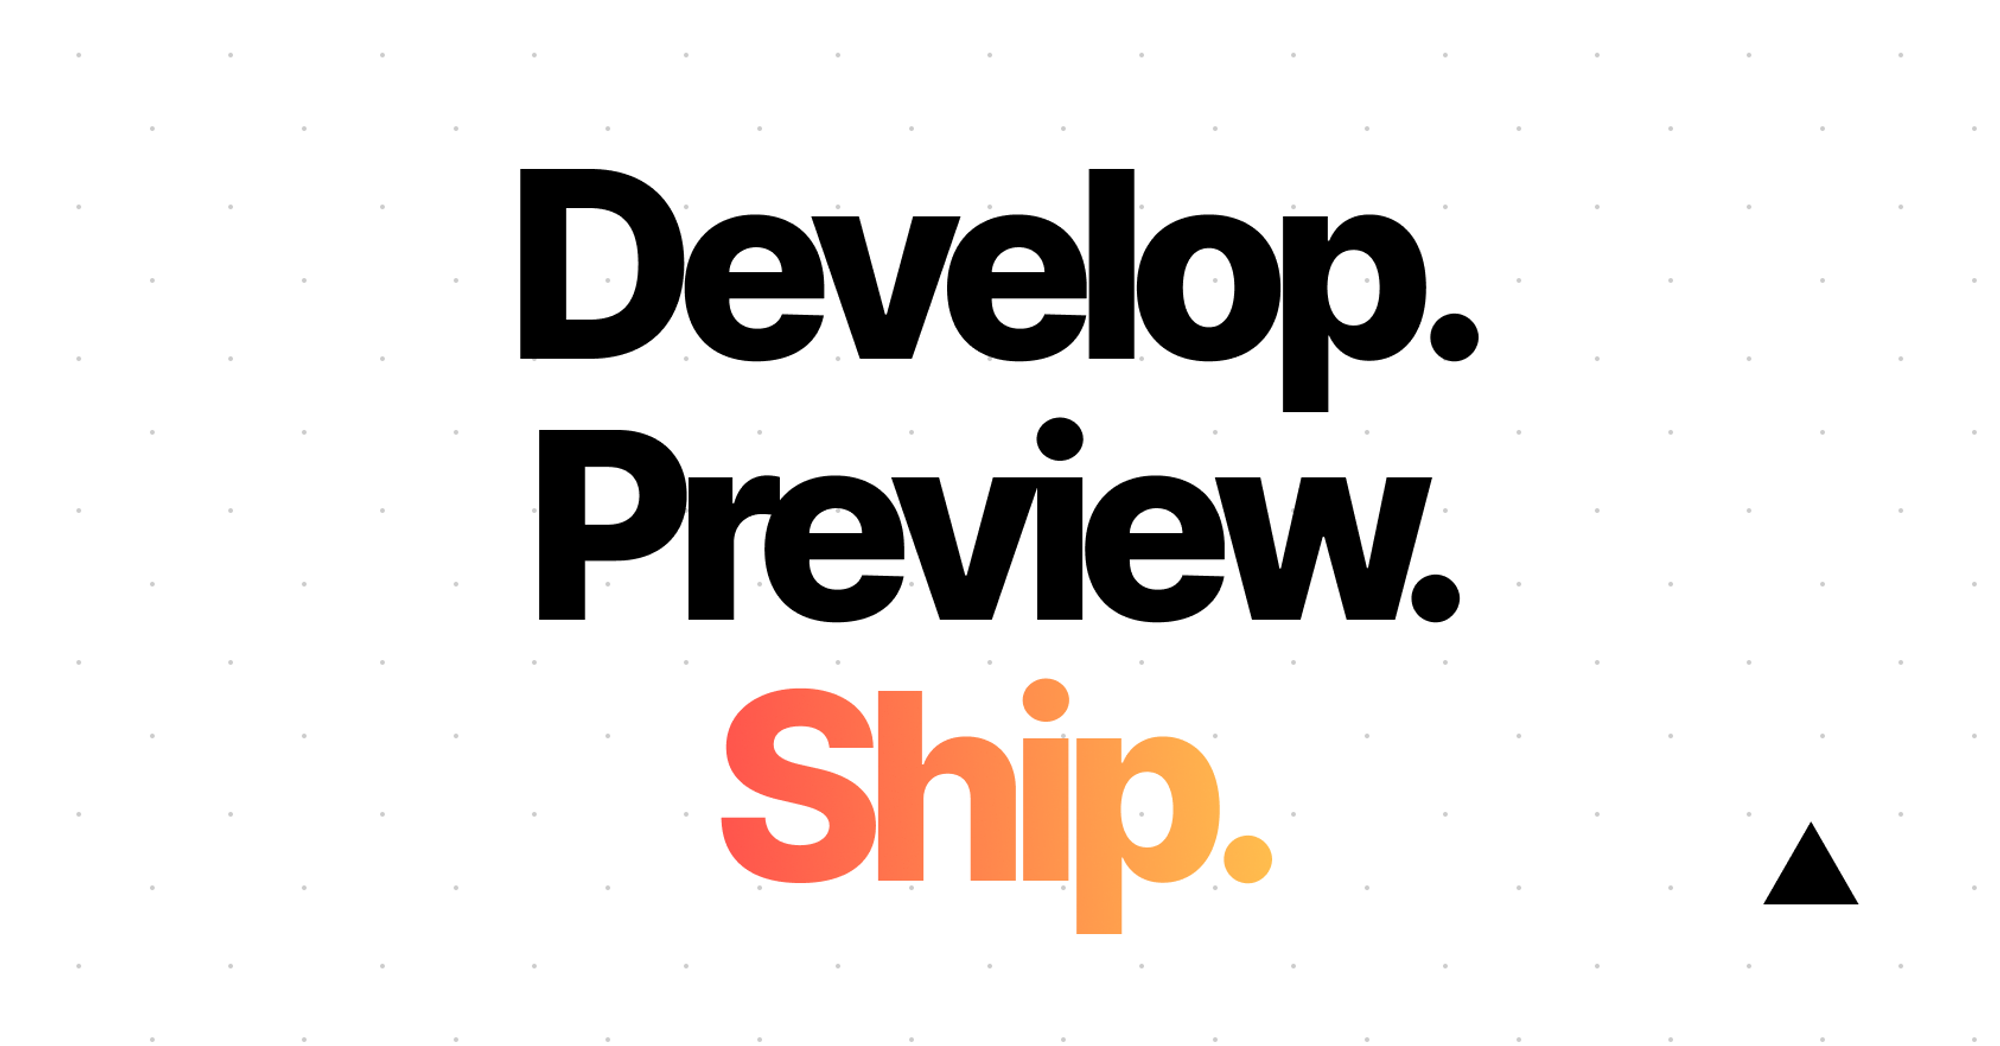 Vercel: Develop. Preview. Ship. For the best frontend teams